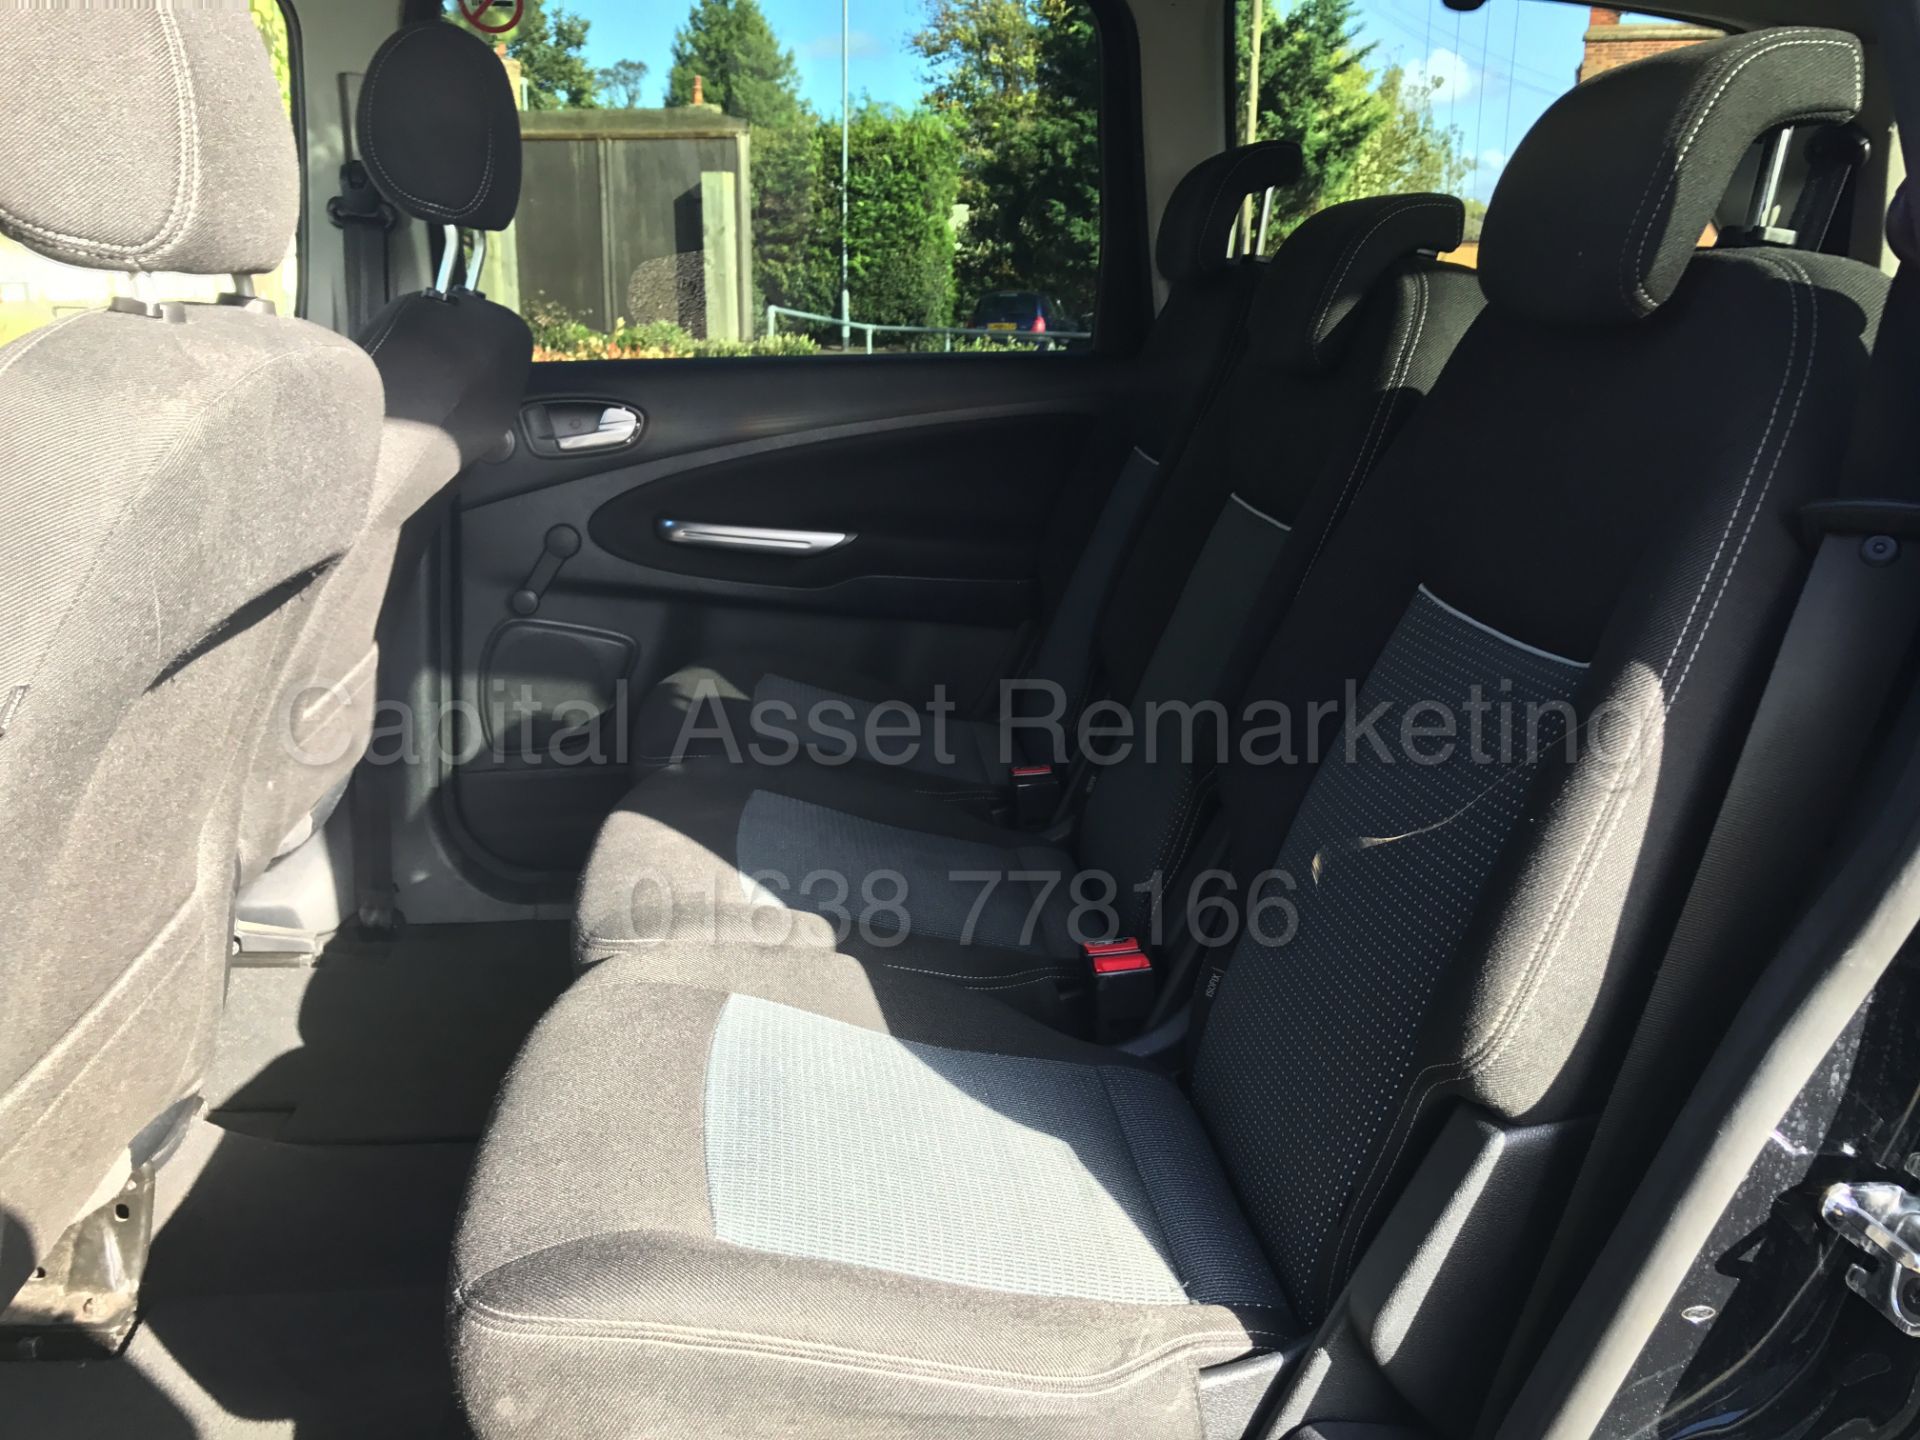 (ON SALE) FORD GALAXY 'ZETEC' 7 SEATER MPV (2014 MODEL) '2.0 TDCI -140 BHP' (1 OWNER) *FULL HISTORY* - Image 14 of 28